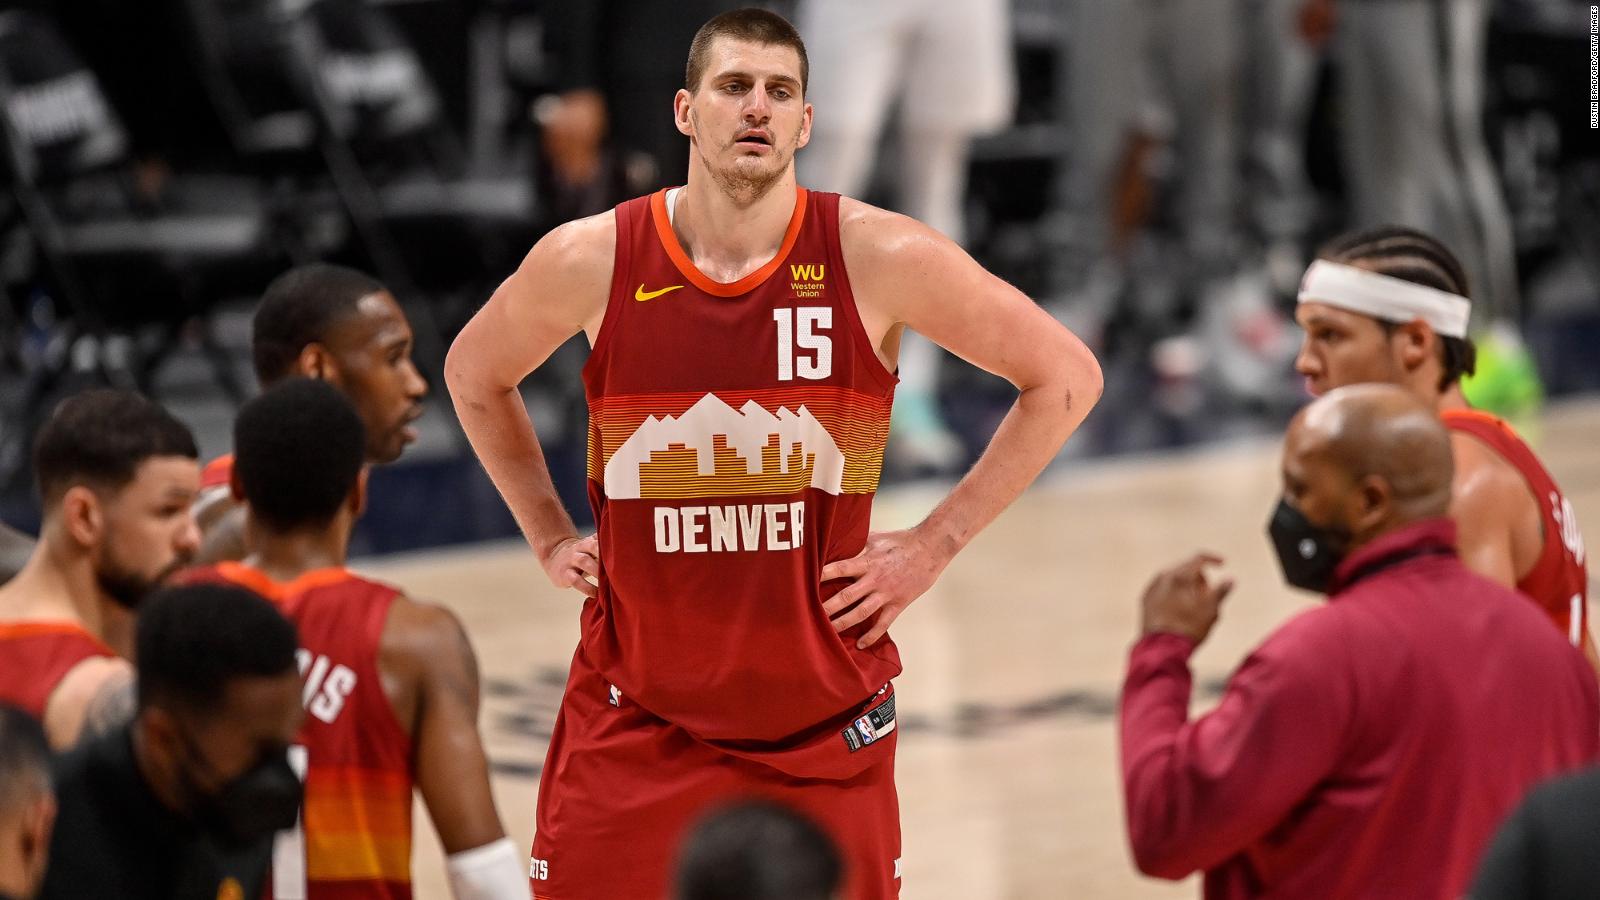 Nikola Jokic I was a misfit when I joined the Nuggets, says MVP CNN